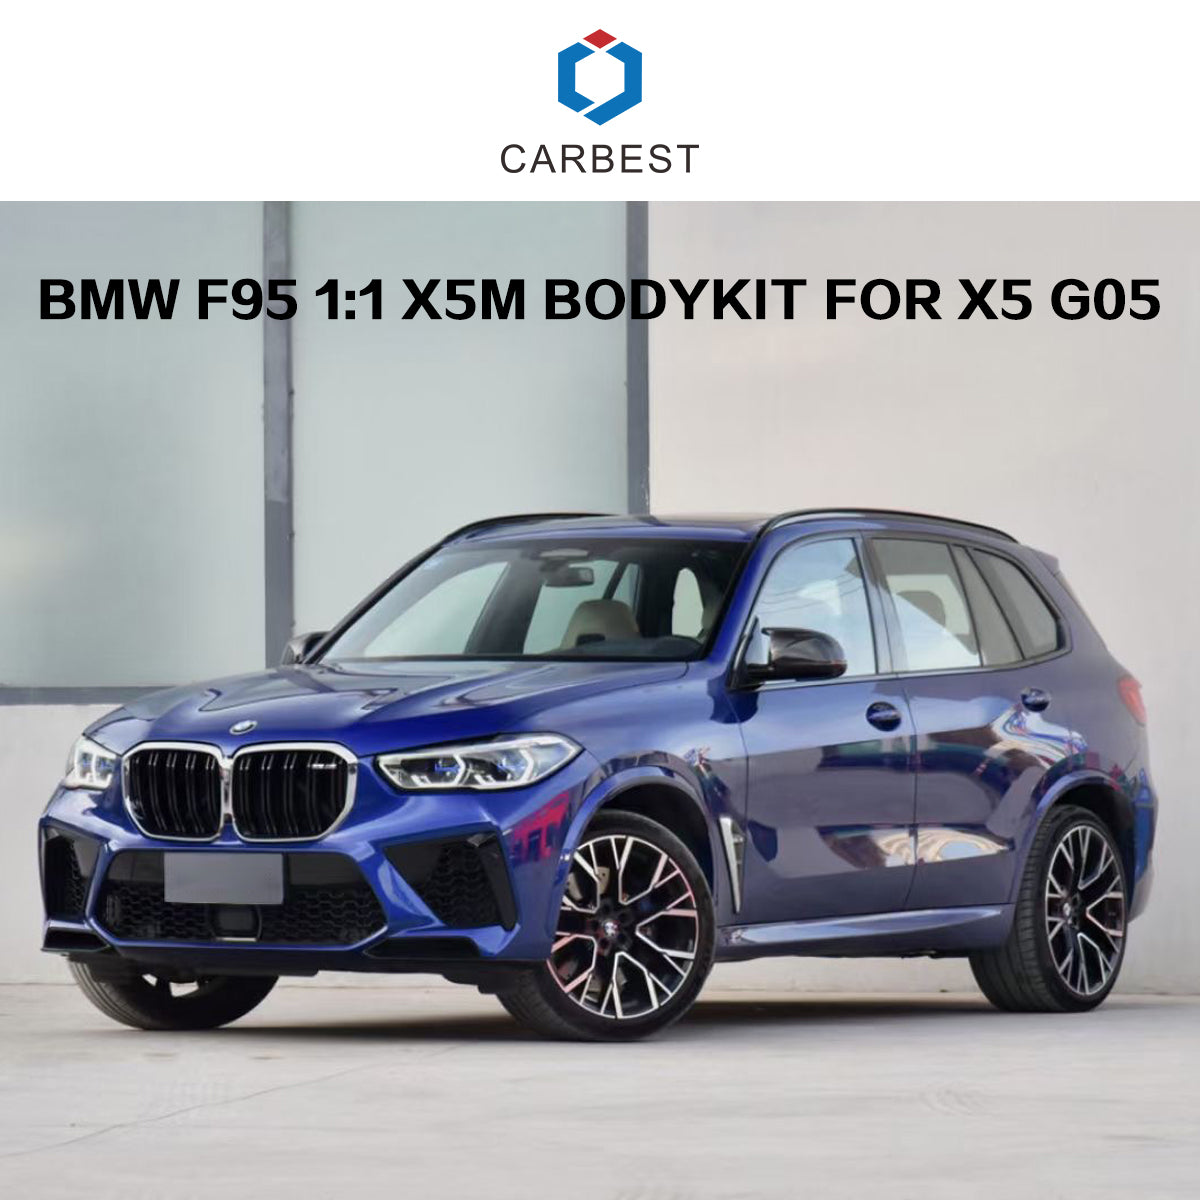 THE 1:1 BMW BODY KIT FOR G05 X5 UPGRADE TO F95 X5M